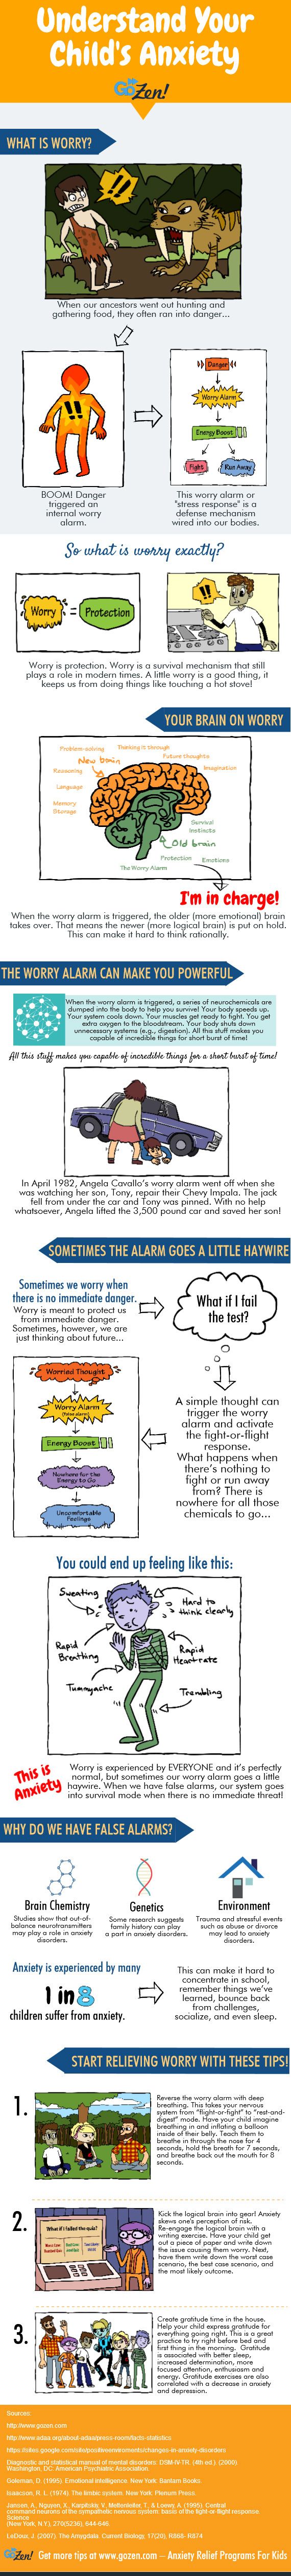 Understand Your Child's Anxiety (Infographic)